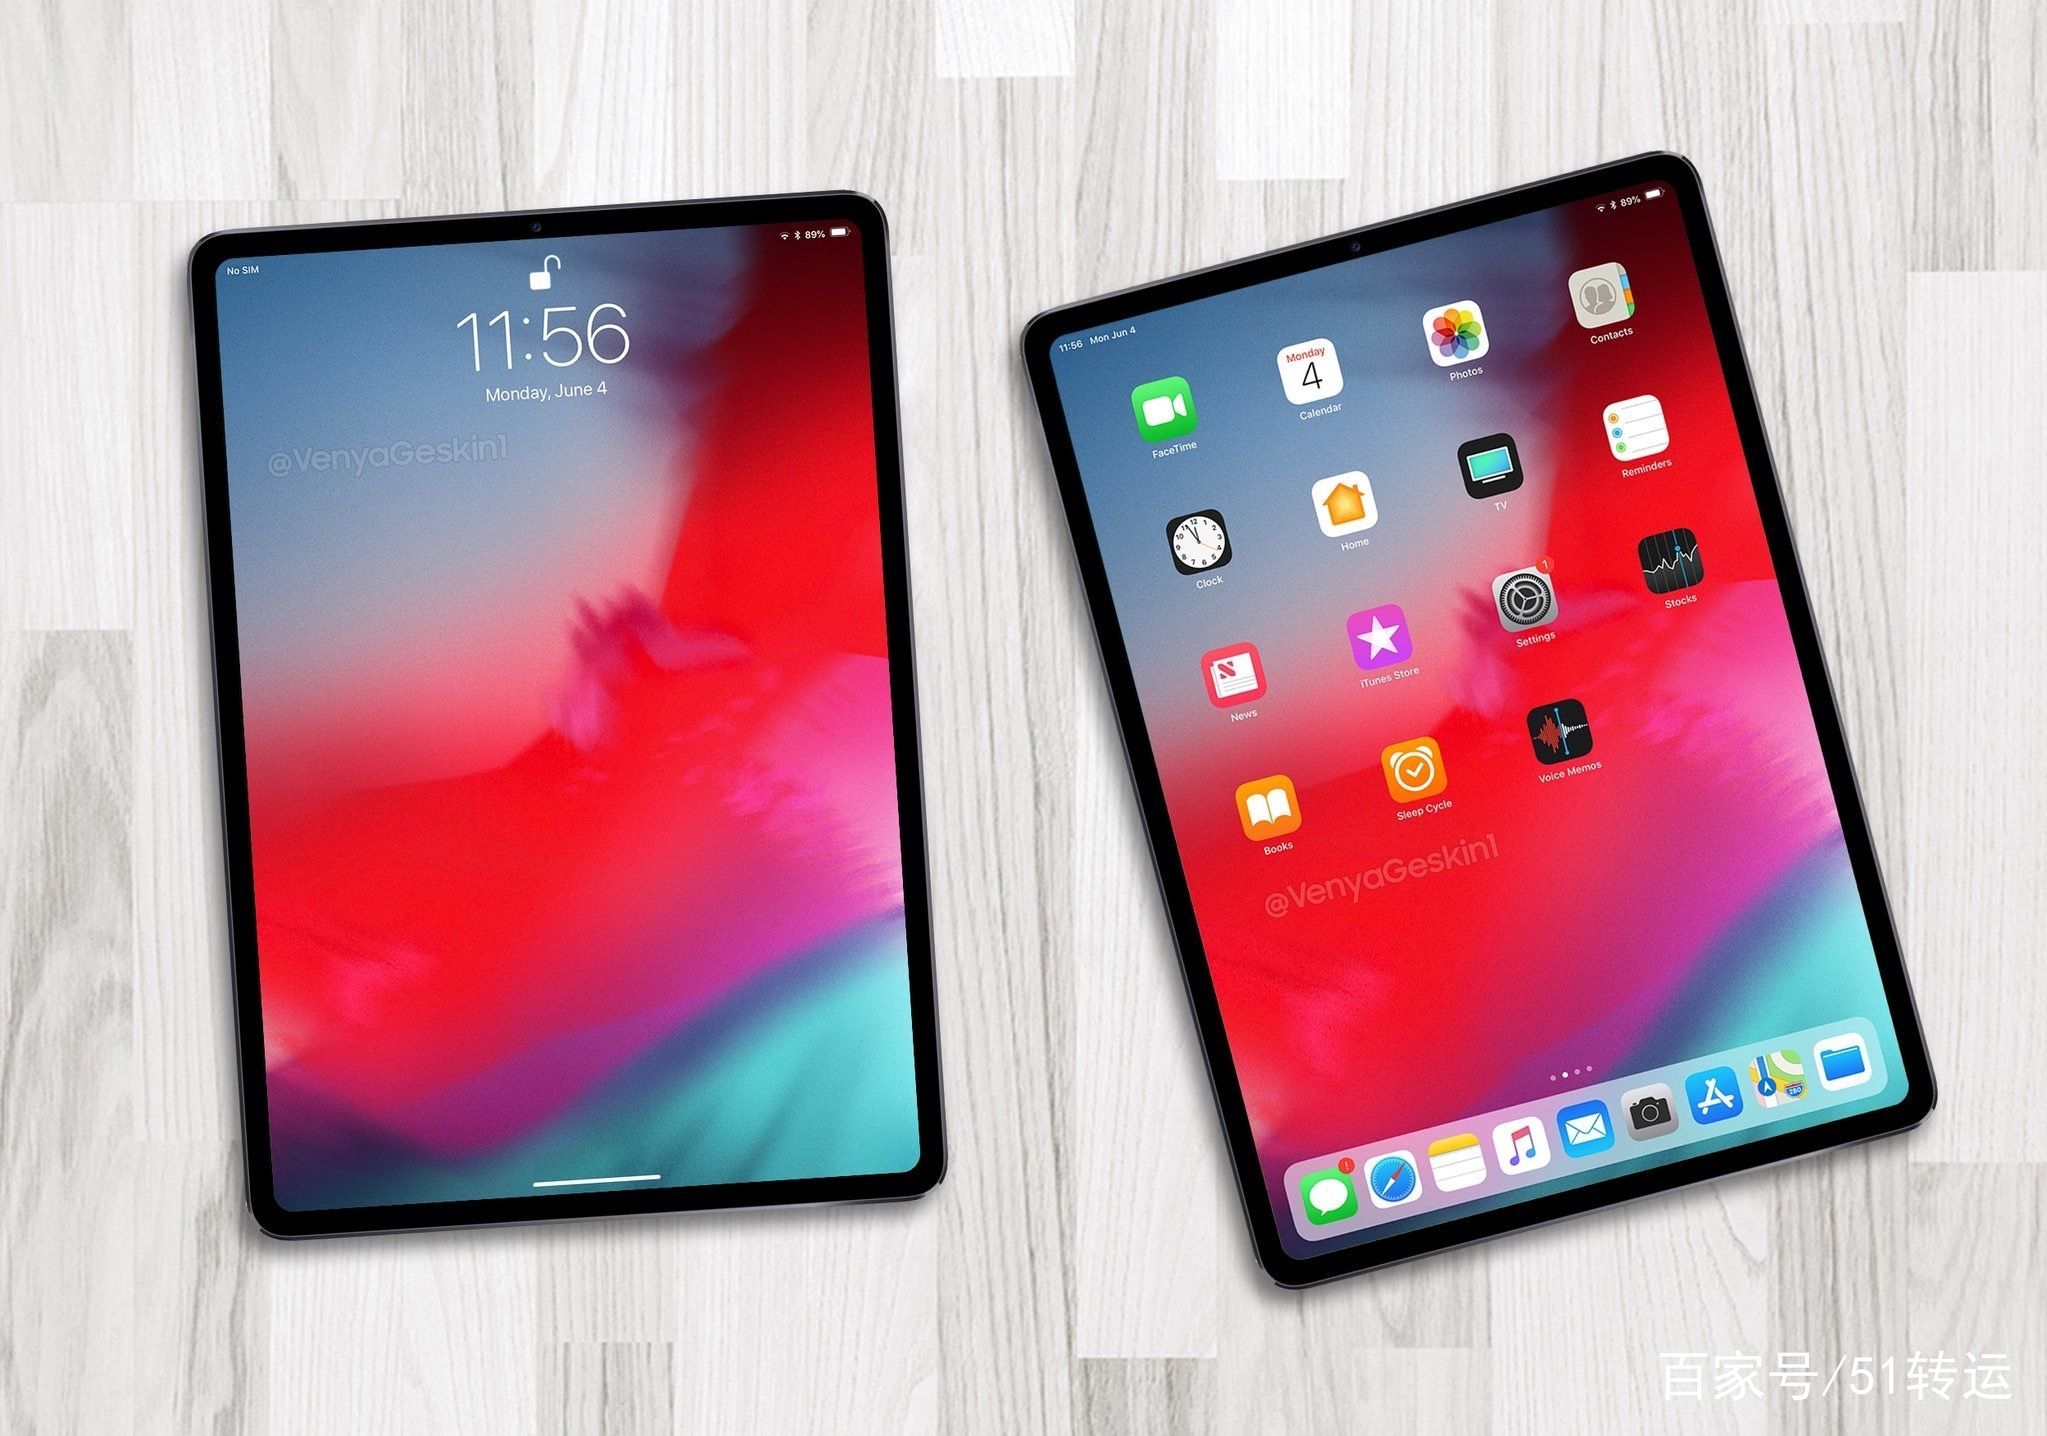 Apple iPad Pro 12.9-inch Review: The Best Gets Better | Digital Trends